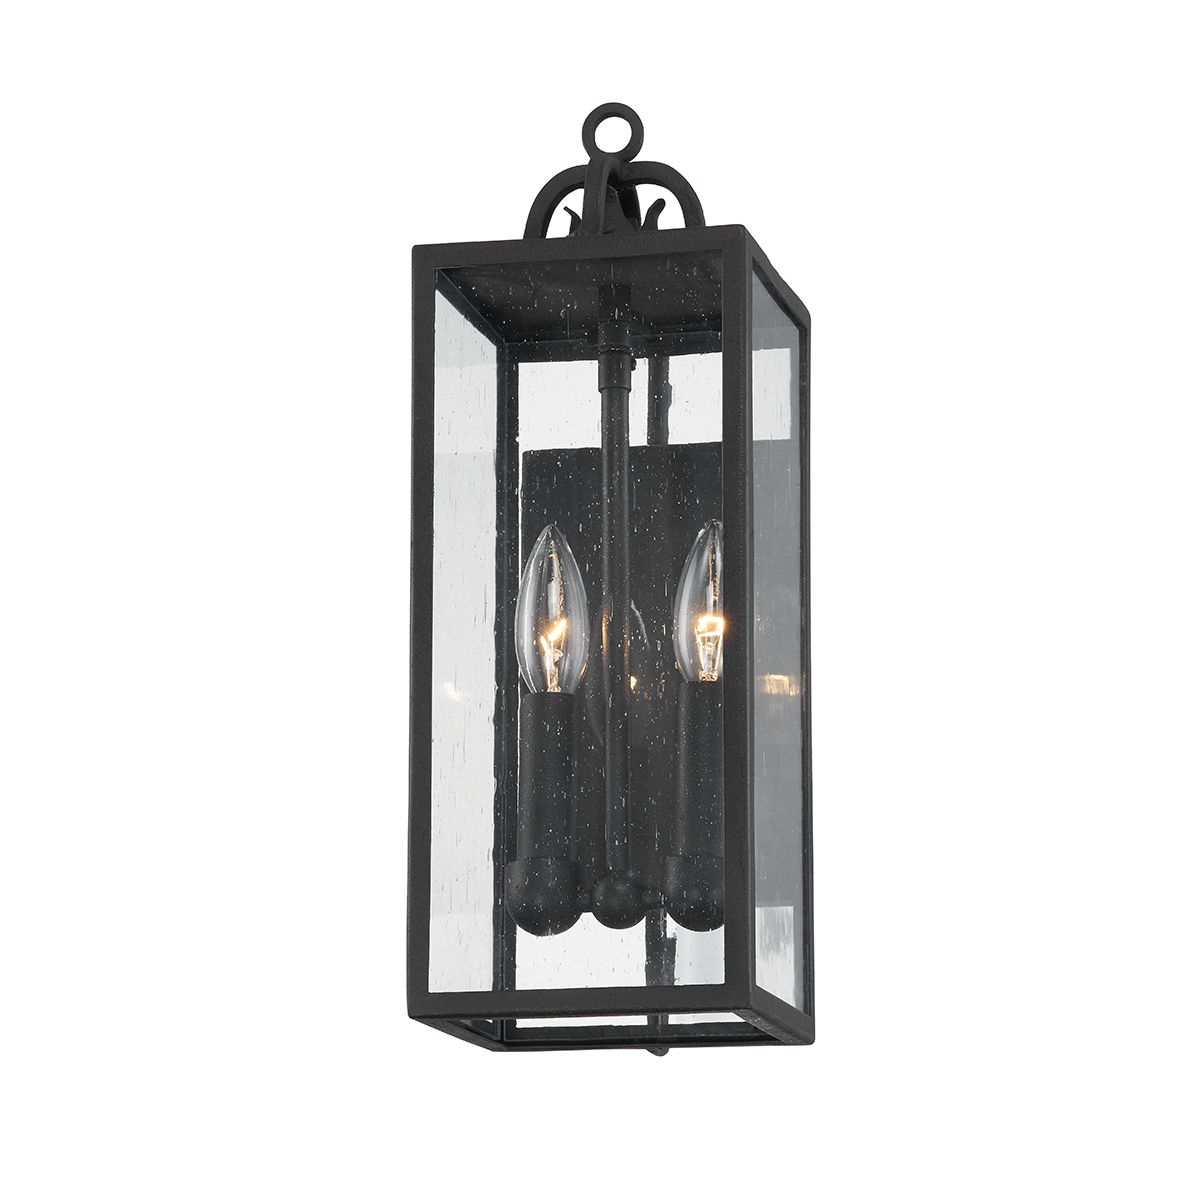 Troy Lighting Caiden Wall Sconce Wall Sconce Troy Lighting FORGED IRON 5.5x5.5x17 